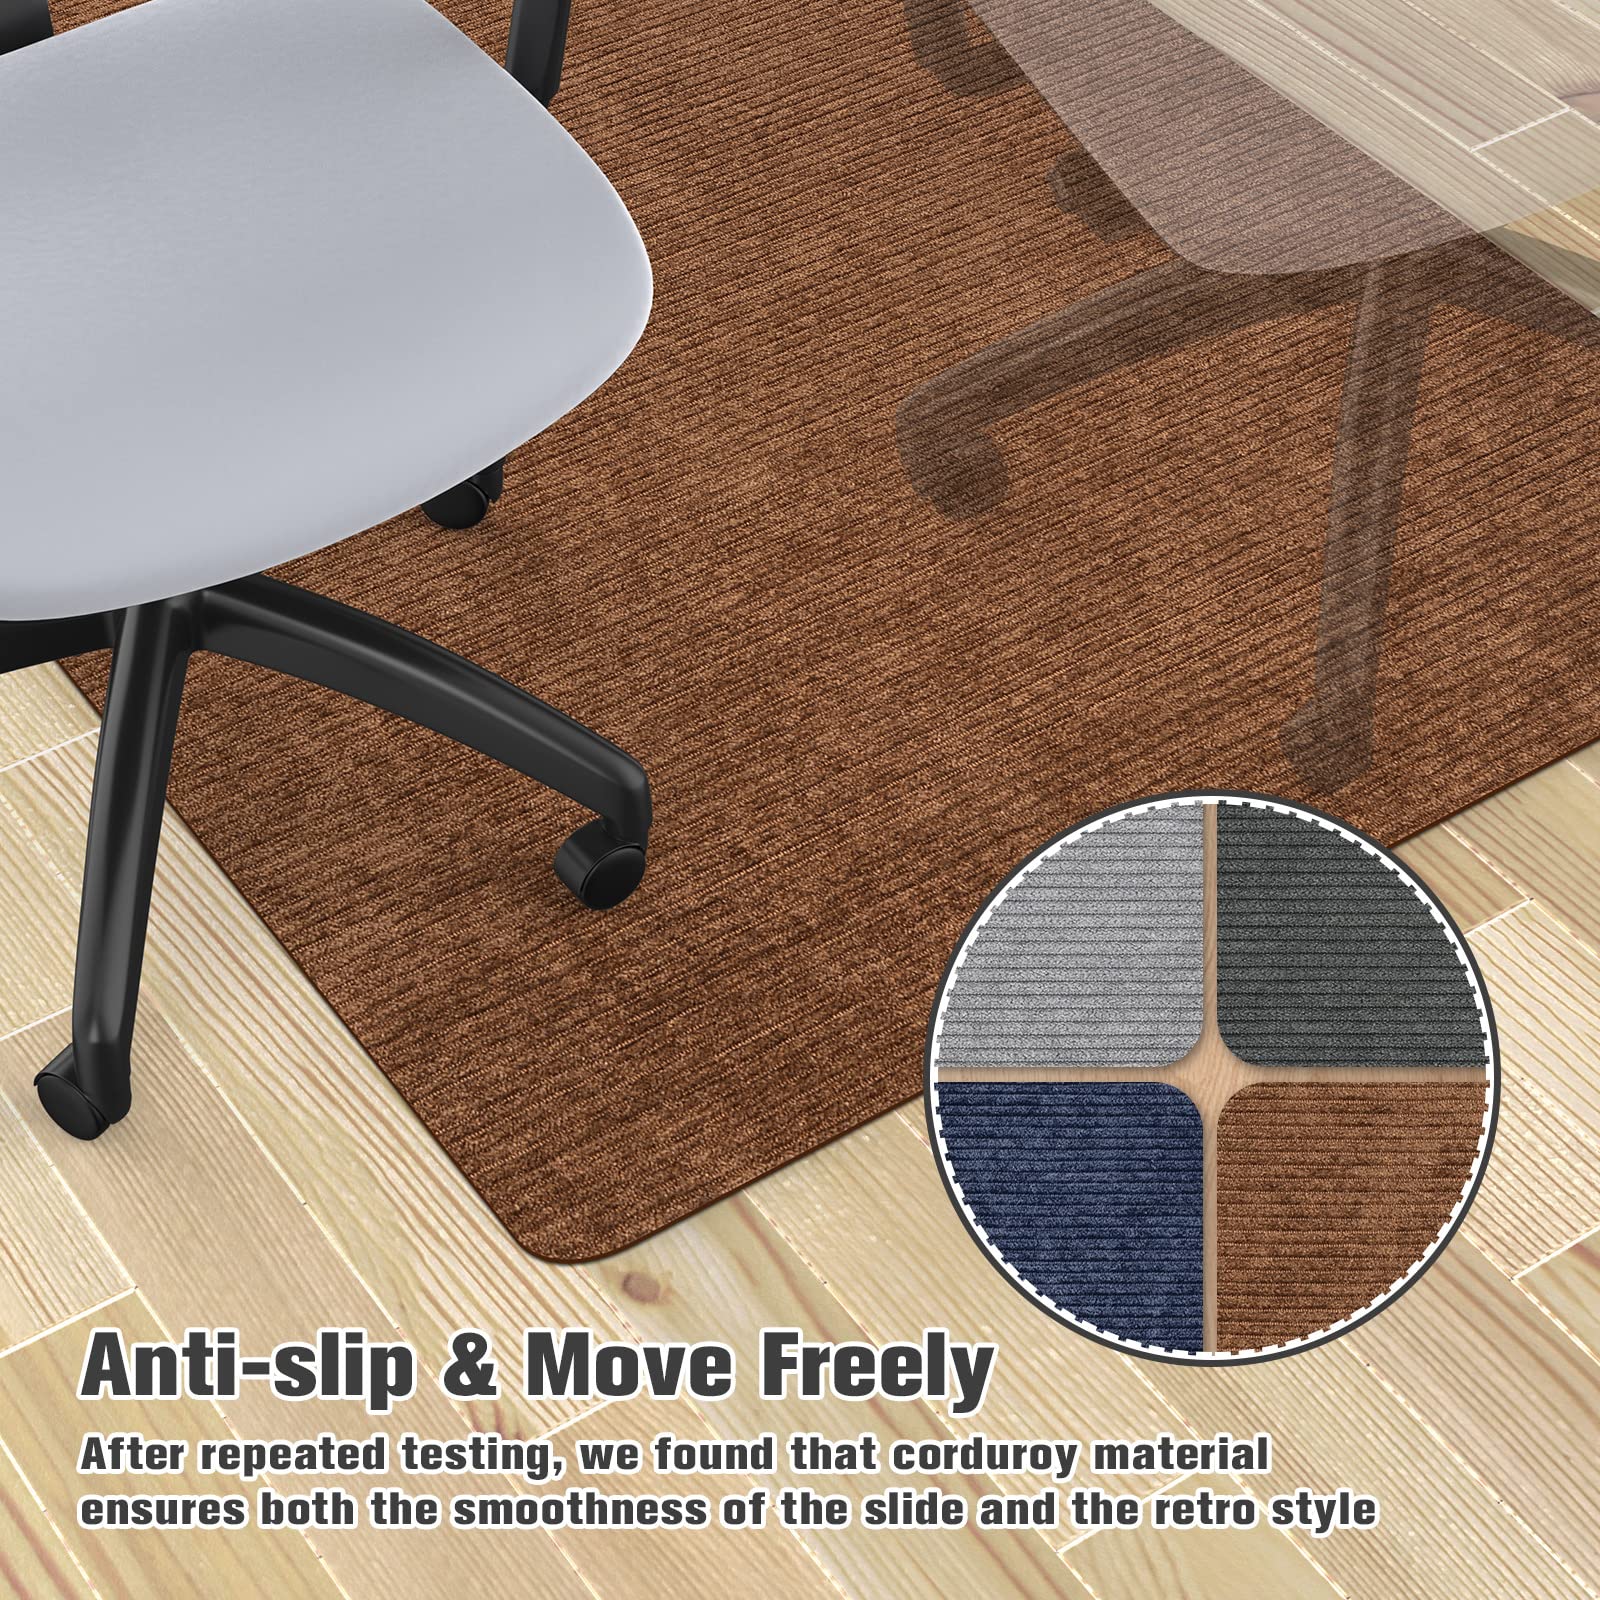 Placoot Desk Chair Mat for Hardwood Floor Corduroy Surface 1/6" Thick 48"x40" Office Chair Mat for Rolling Chairs-100% Large Anti-Slip Backing Under Desk Low-Pile Office Rug Floor Mat for Office/Home